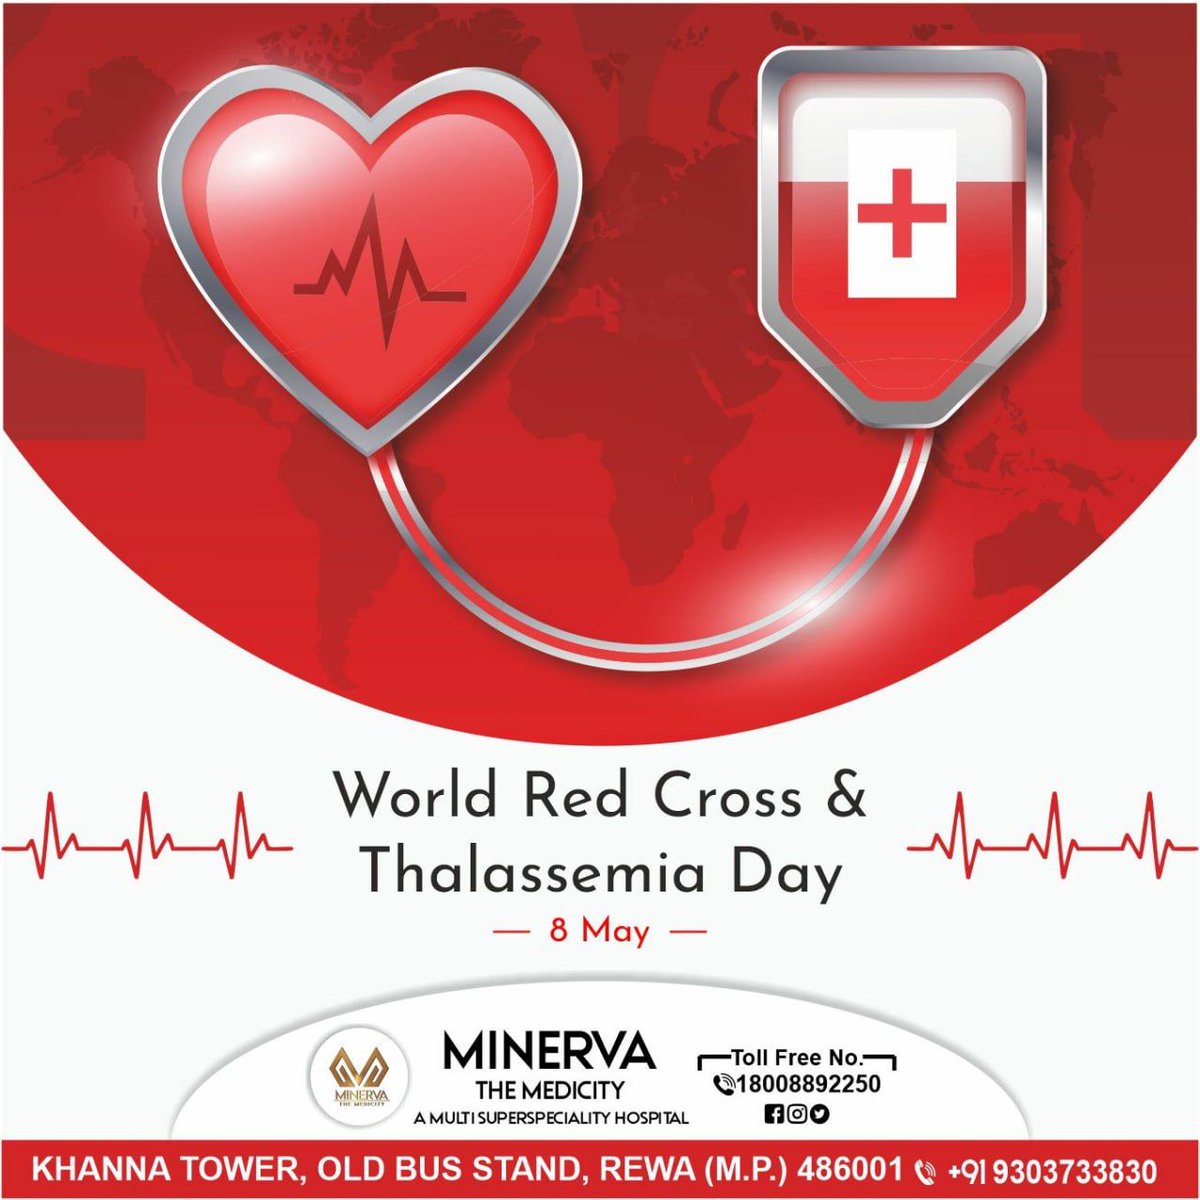 'World Red Cross & Thalassemia Day'

Contacts us now:
Toll free no:- 18008892250
Minerva The Medicity

#WorldRedCross #ThalassemiaDay #healthtrip #internationalnodietday2023 #minervathemedicity #minervahospital #besthospital #bestdoctors
#healthcamp #freehealthcamp